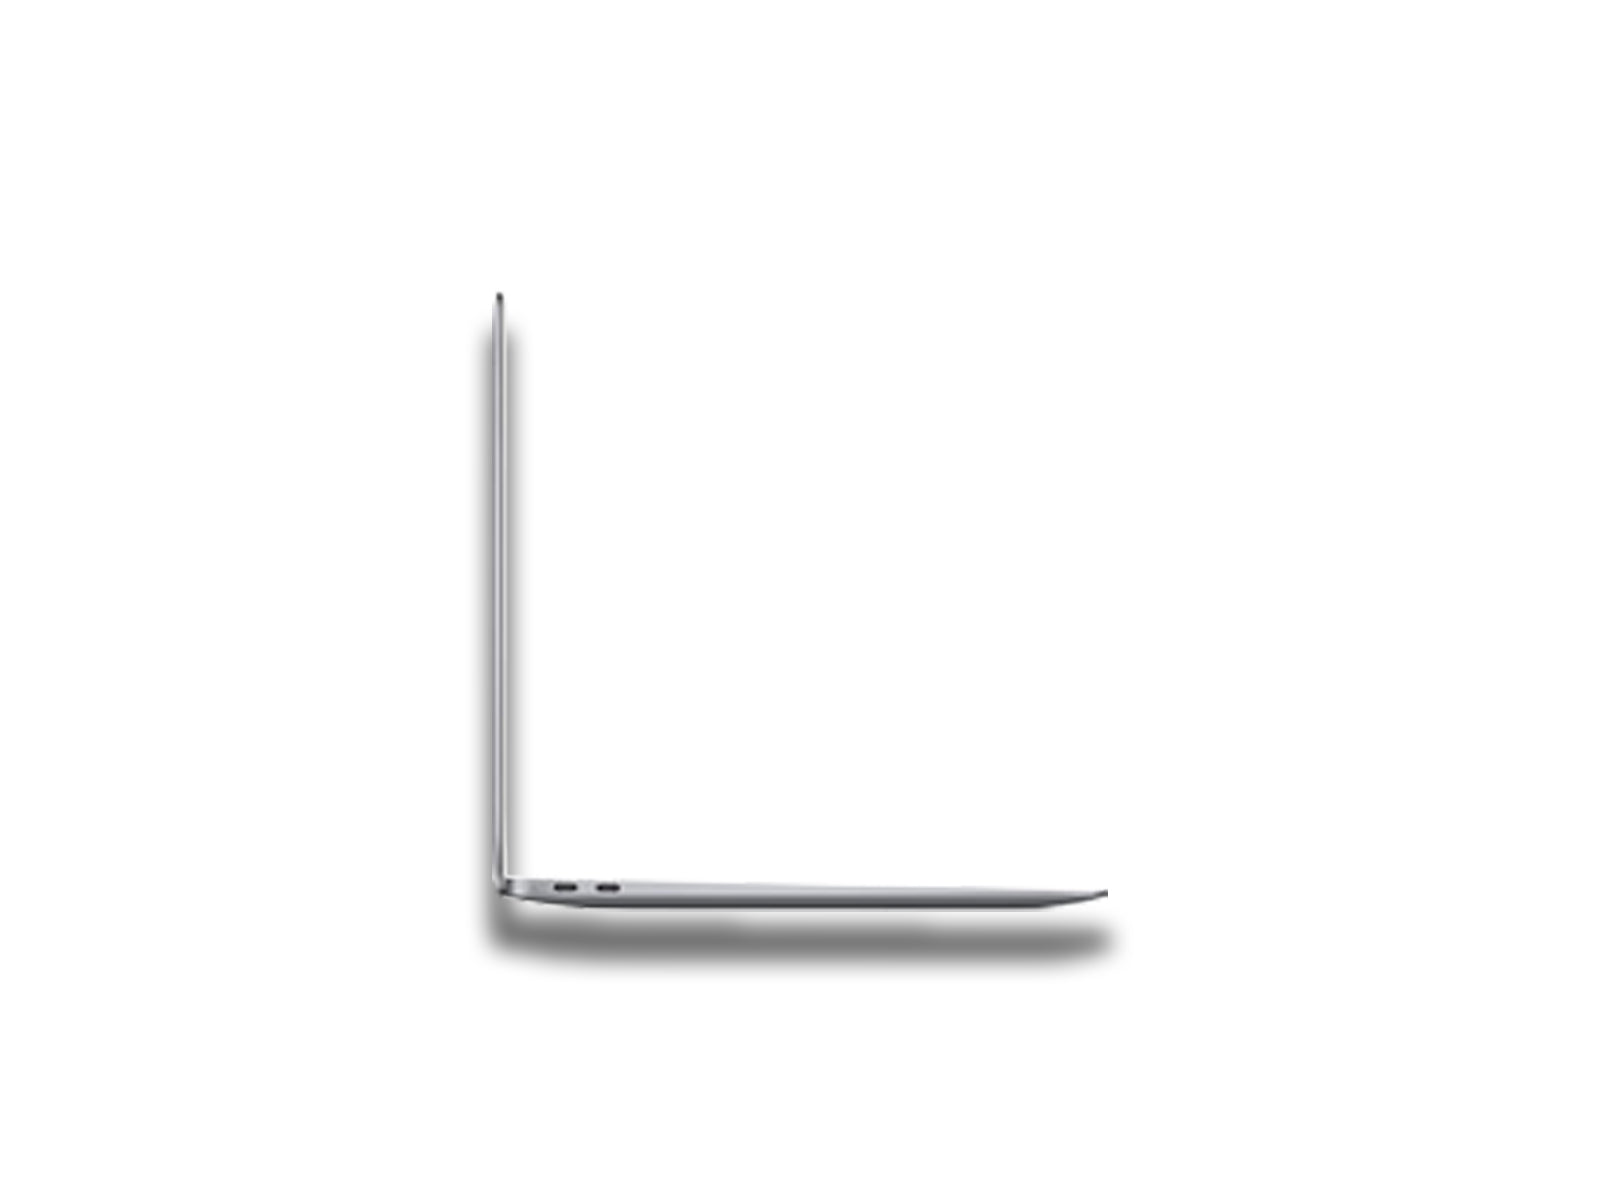 Image shows a side view of the opened macbook air 2018